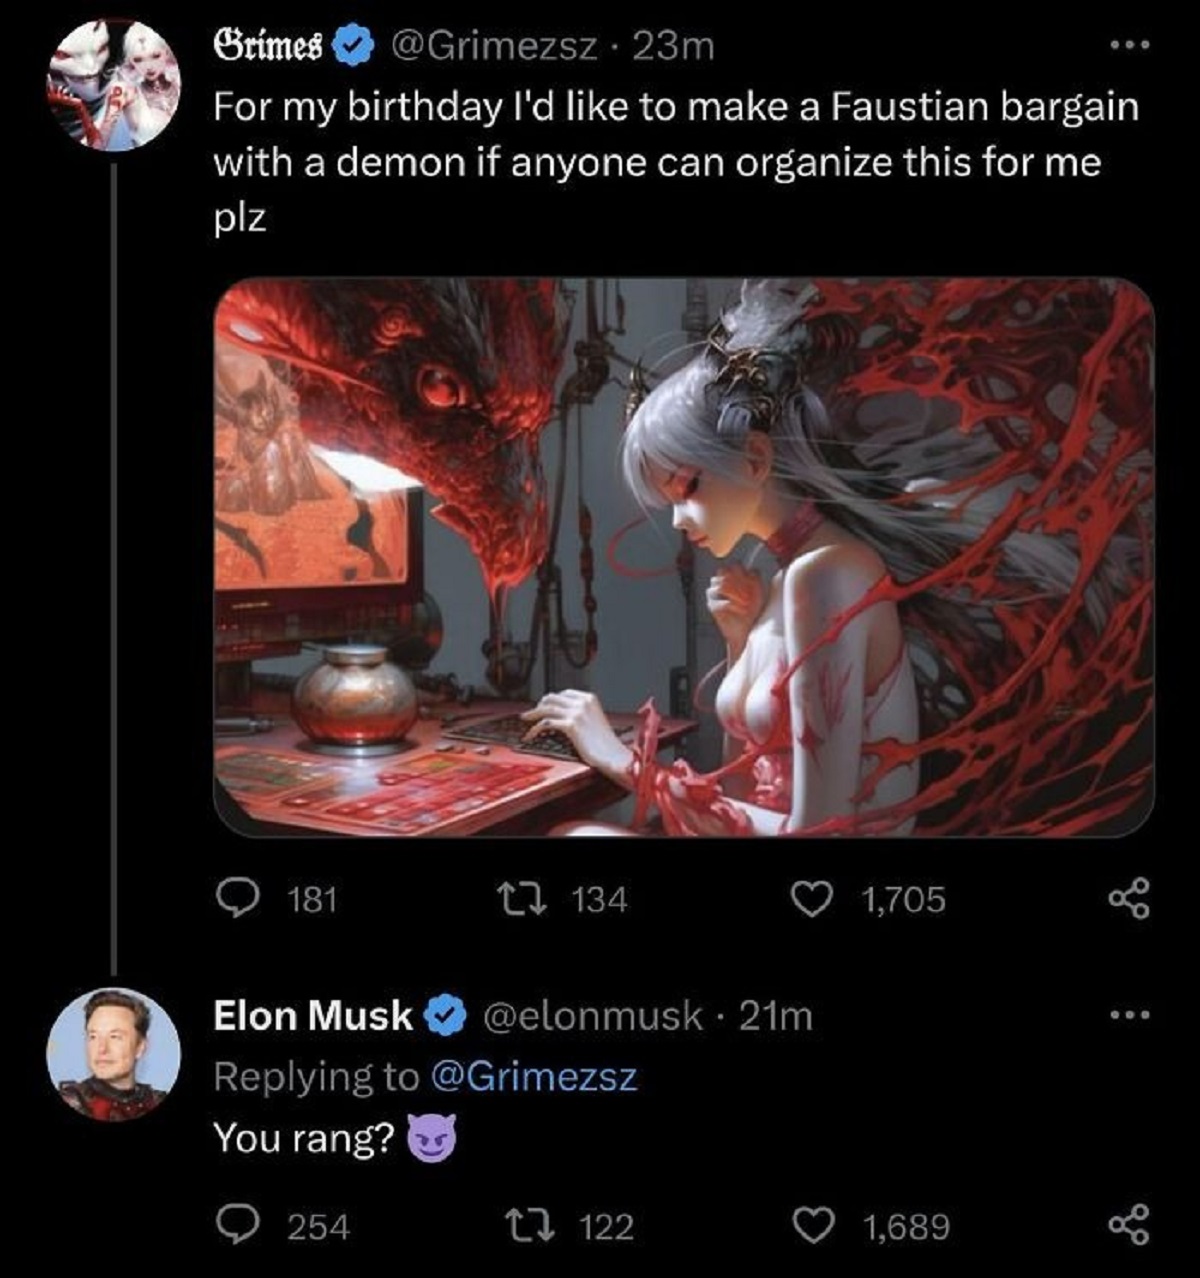 cringe pics - screenshot - Grmes 23m For my birthday I'd to make a Faustian bargain with a demon if anyone can organize this for me plz 181 134 Elon Musk 21m You rang? 254 122 1,705 1,689 ...